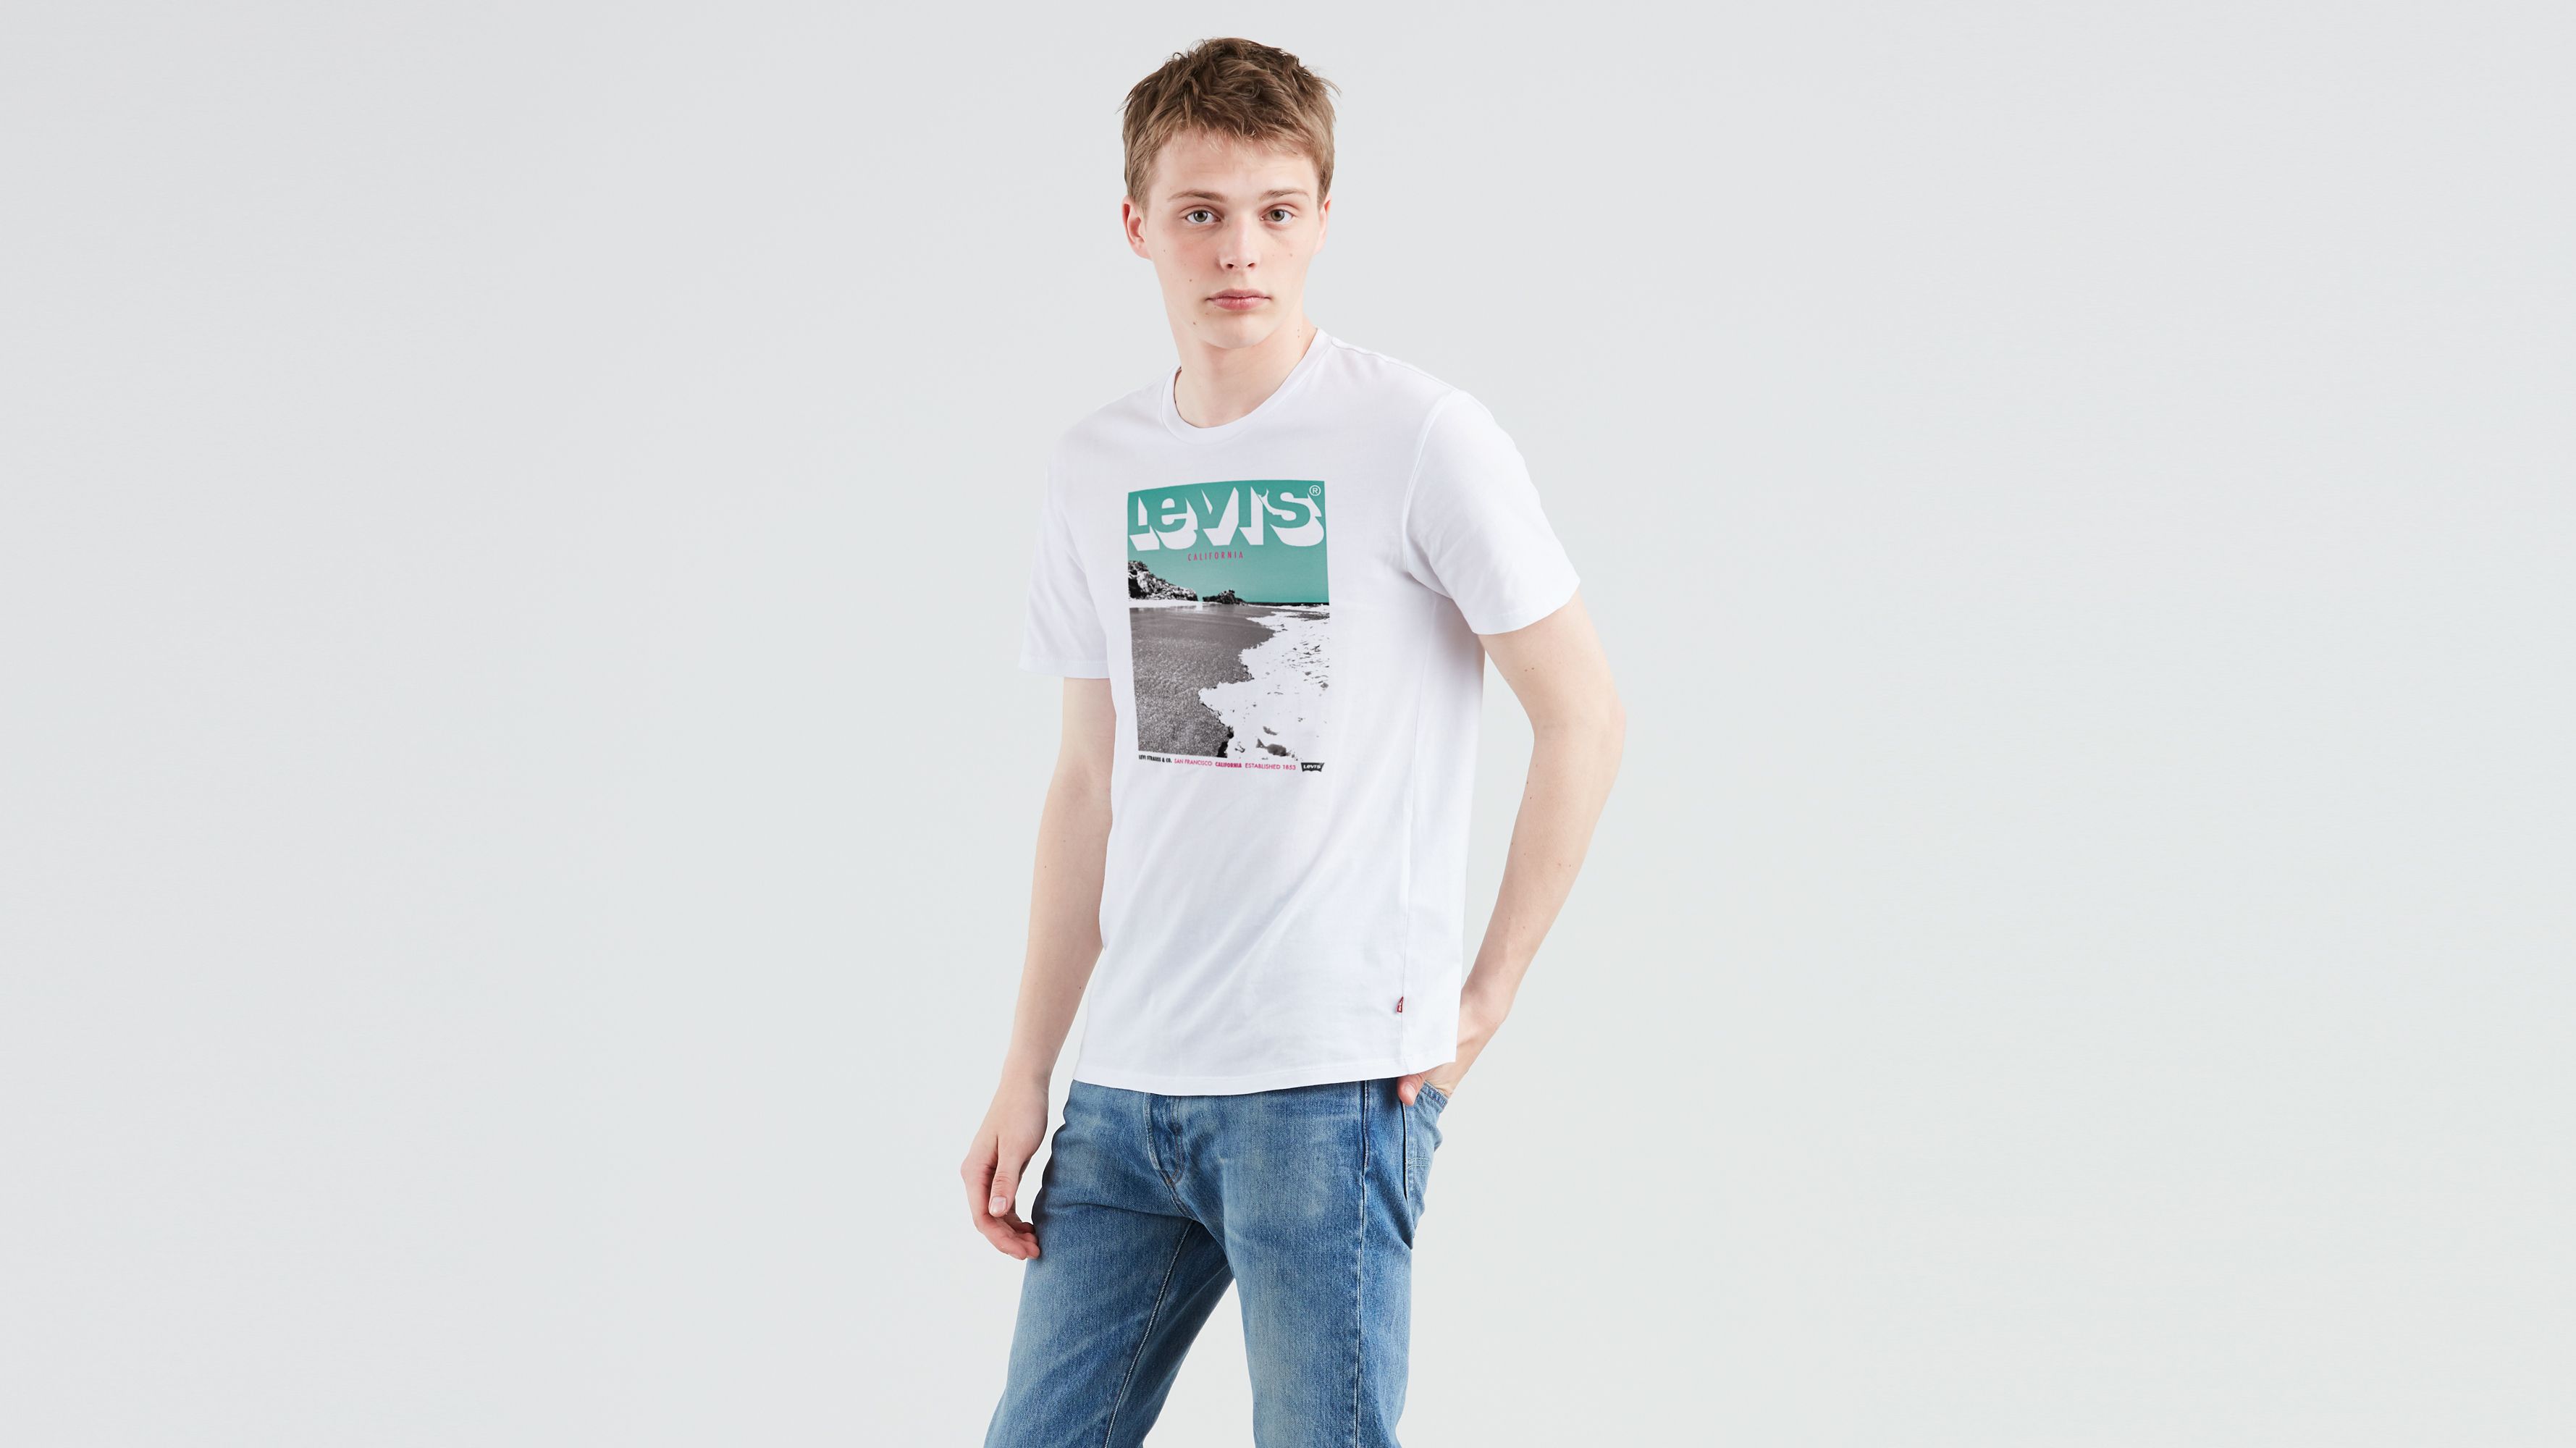 levis graphic tees